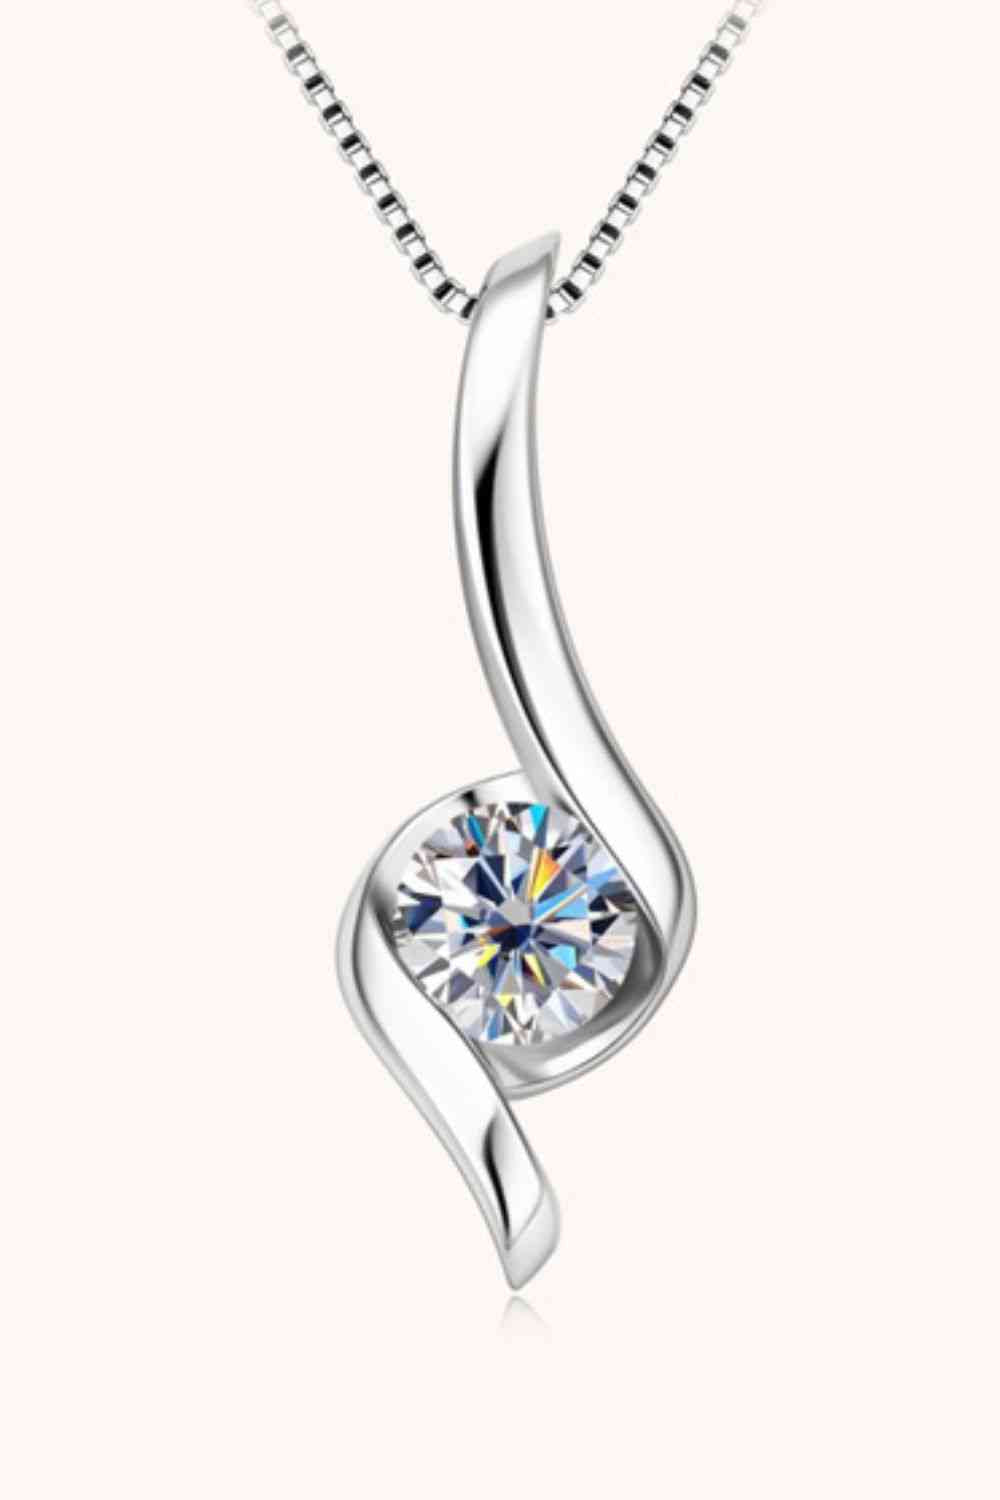 1 Carat Moissanite 925 Sterling Silver Necklace  Hot Trends